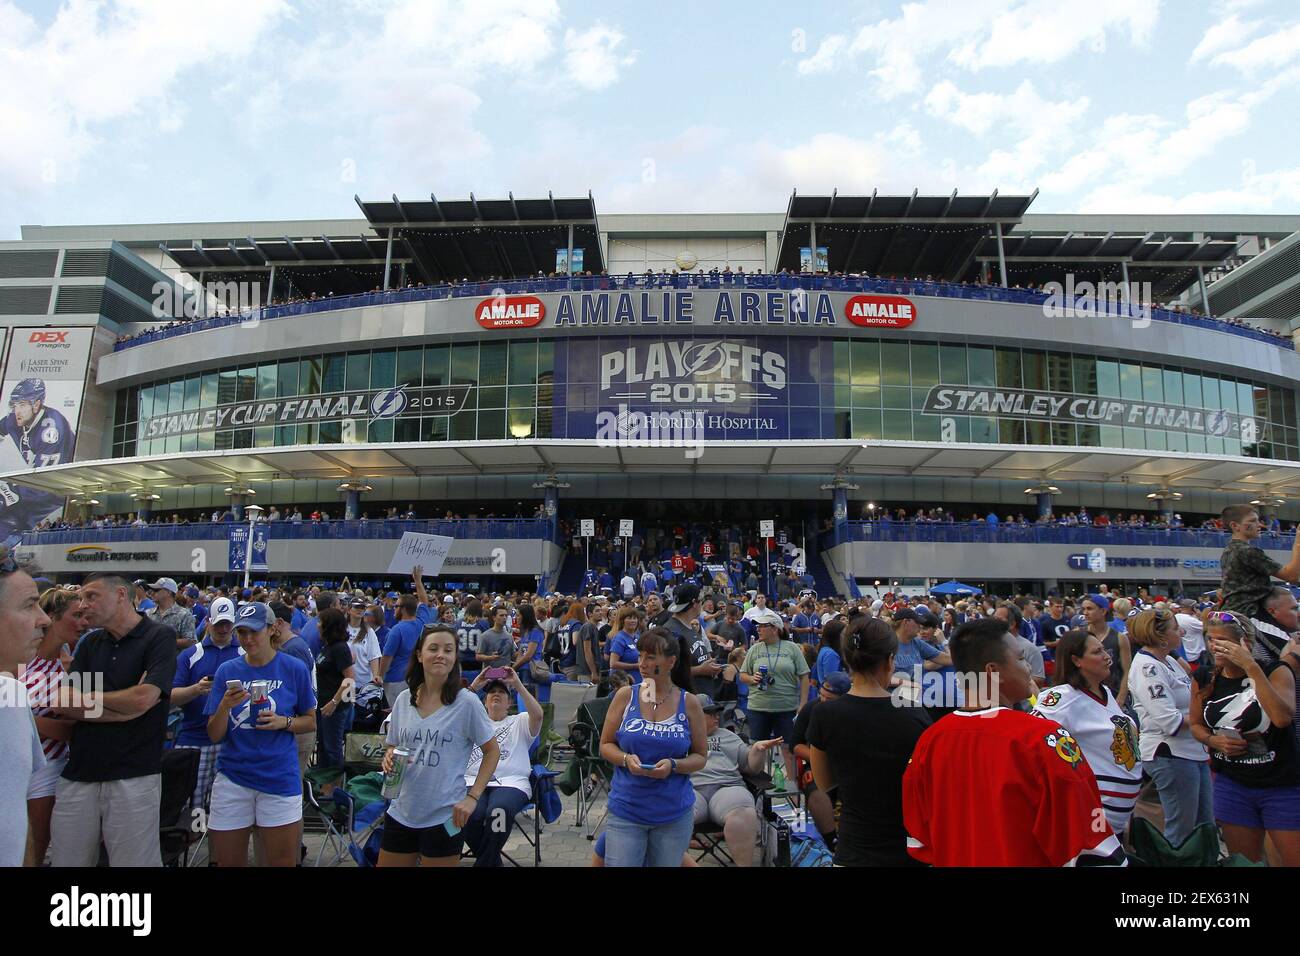 Hundreds of fans gather outside of Amalie Arena before the start of Game 1  of the Stanley Cup Final in Tampa, Fla., as the Tampa Bay Lightning play  host to the Chicago